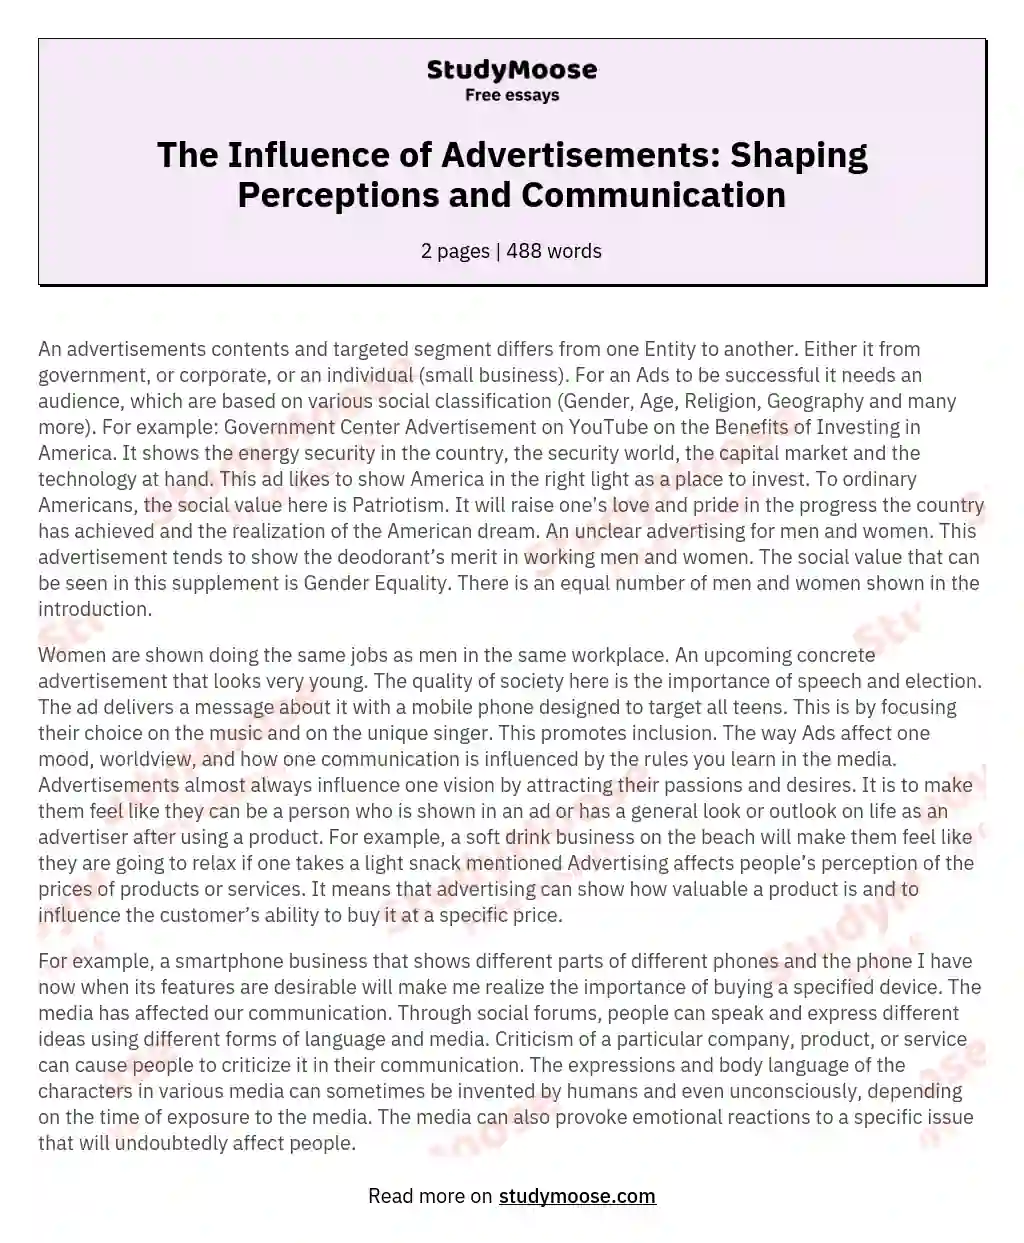 The Influence of Advertisements: Shaping Perceptions and Communication essay